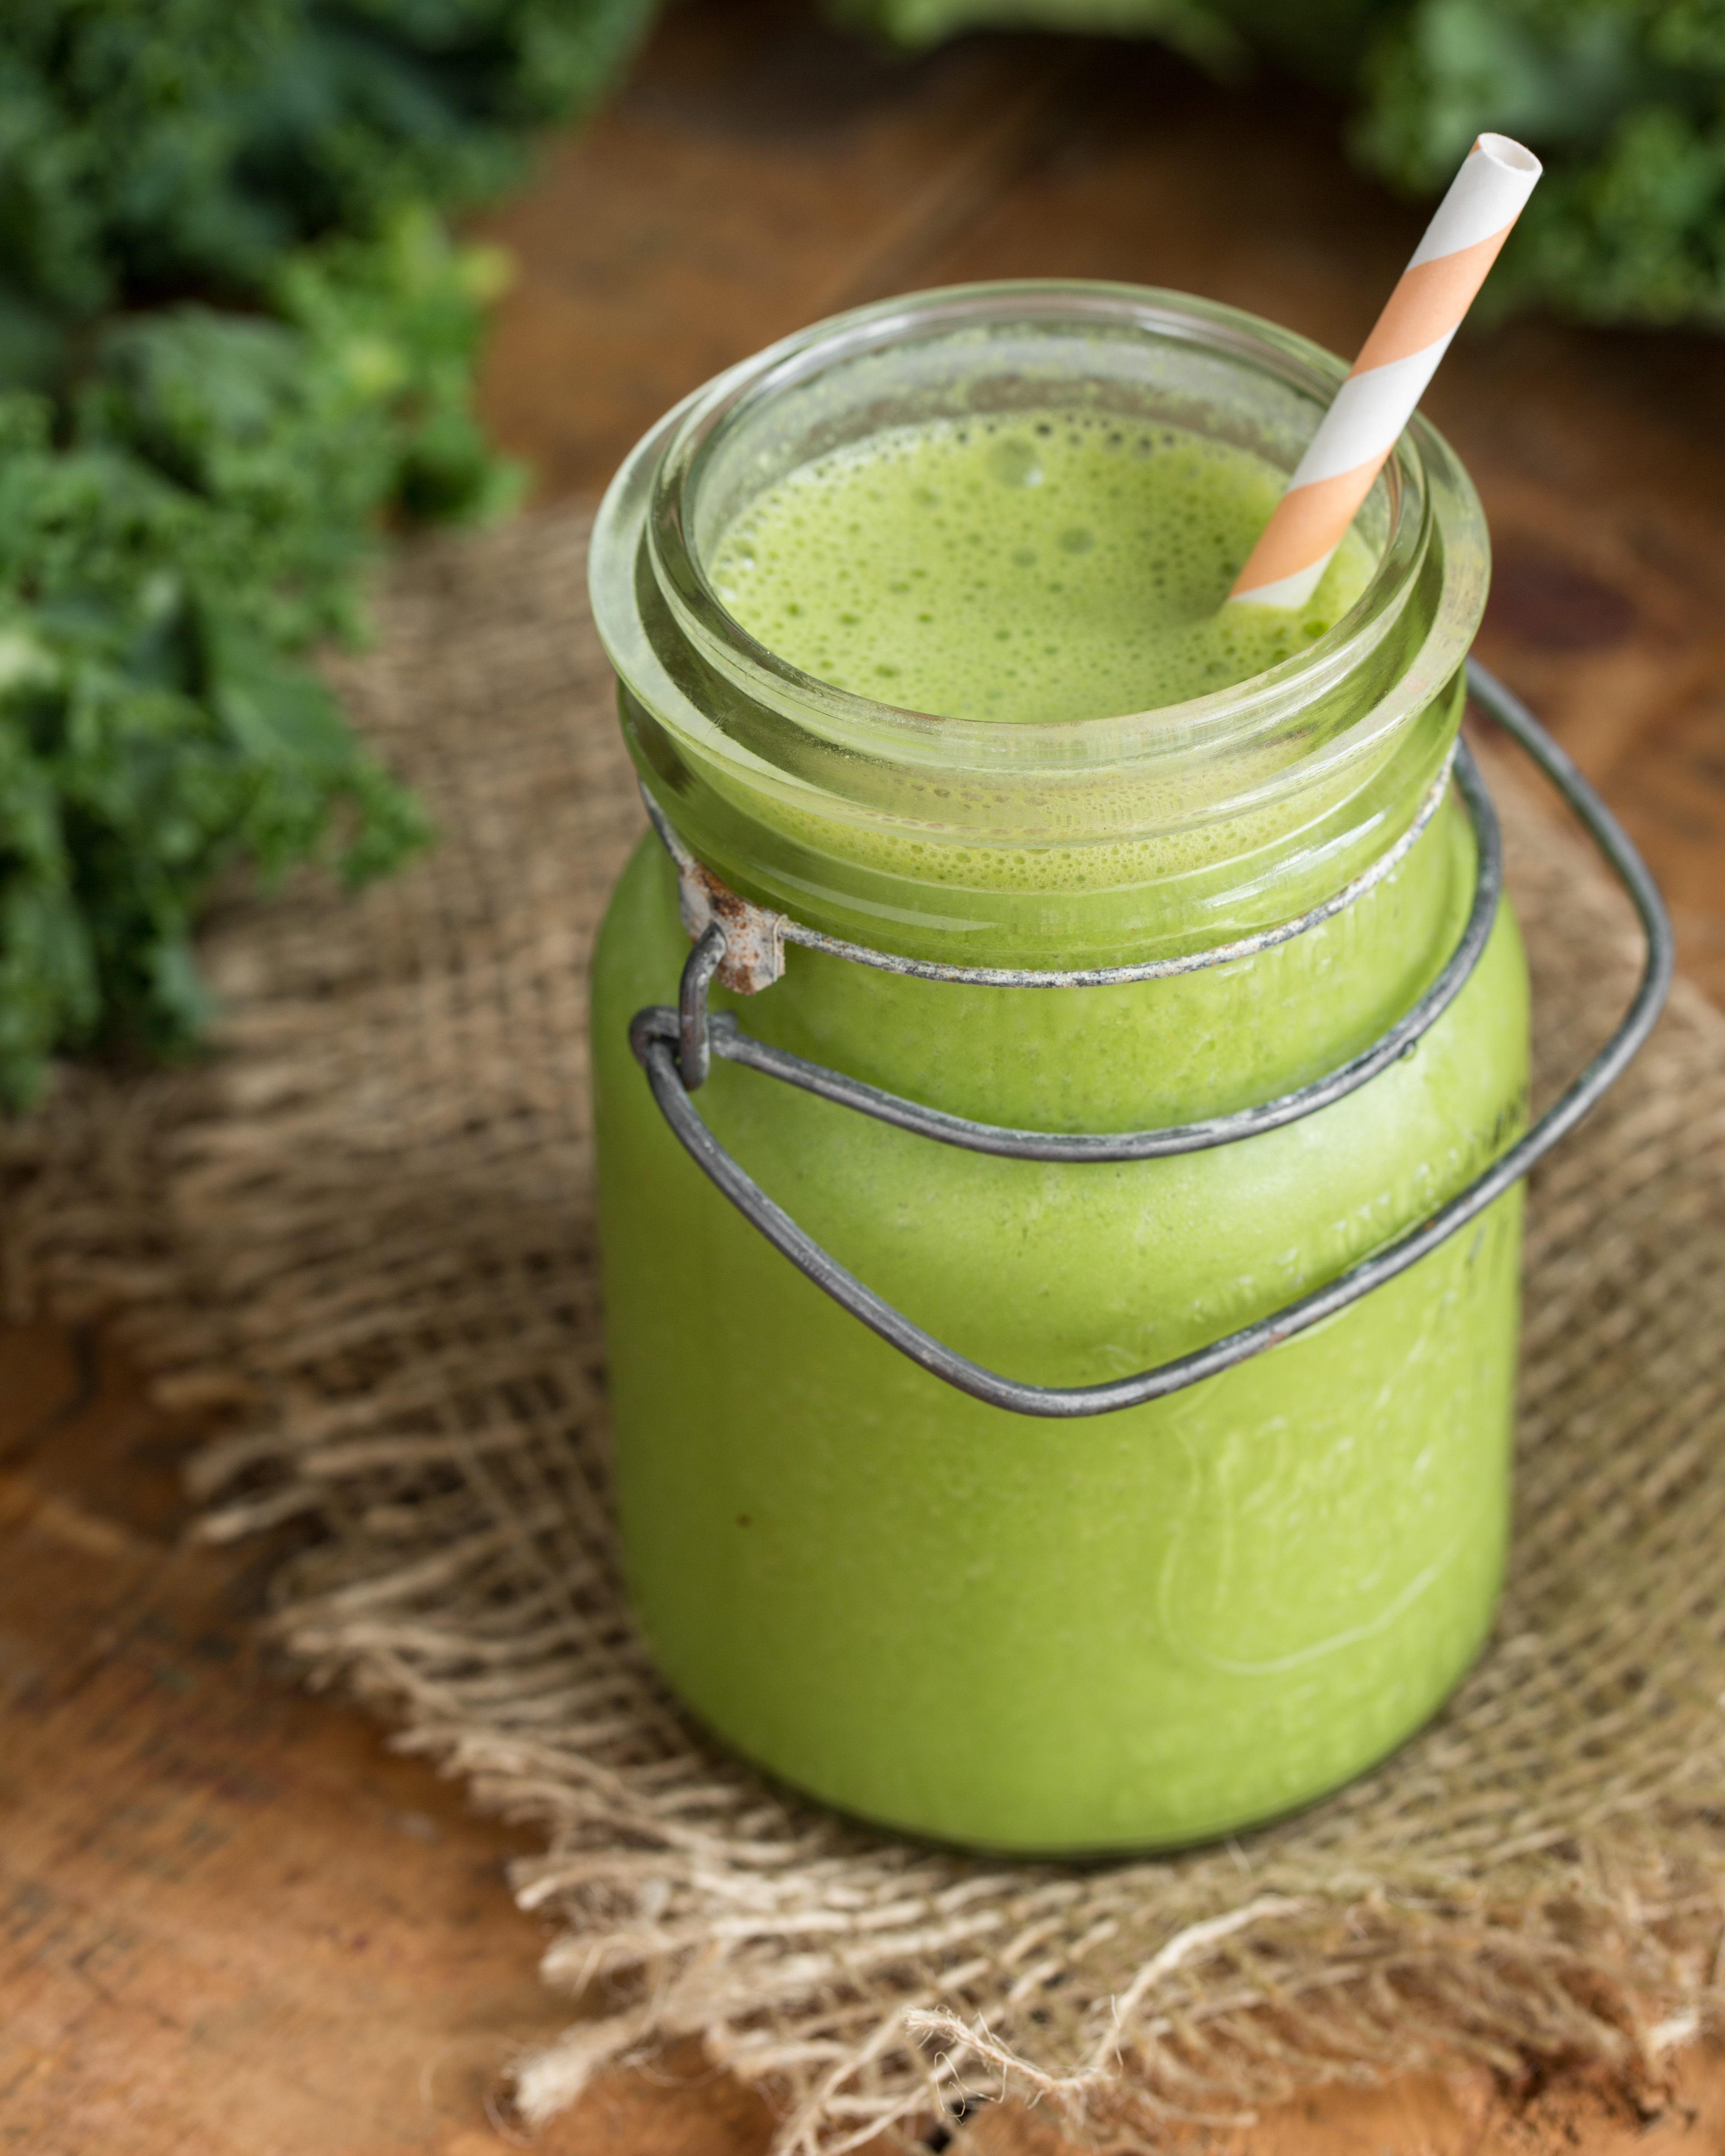 Classic green monster smoothie from Oh She Glows